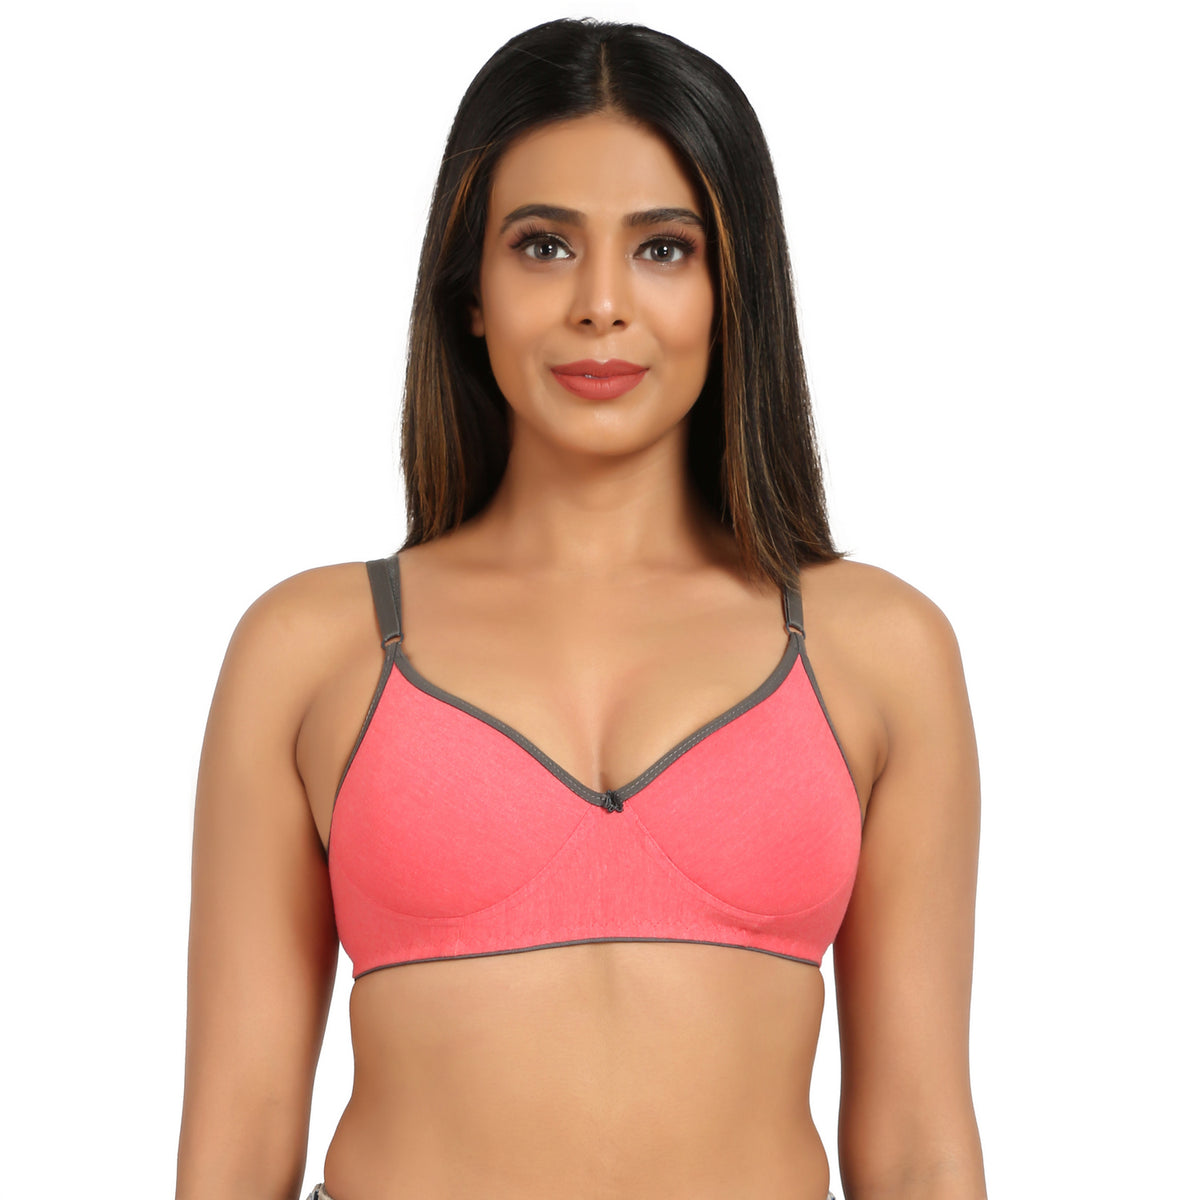 Bruchi club Women Lightly Padded Bra with 3/4th coverage-Pink color